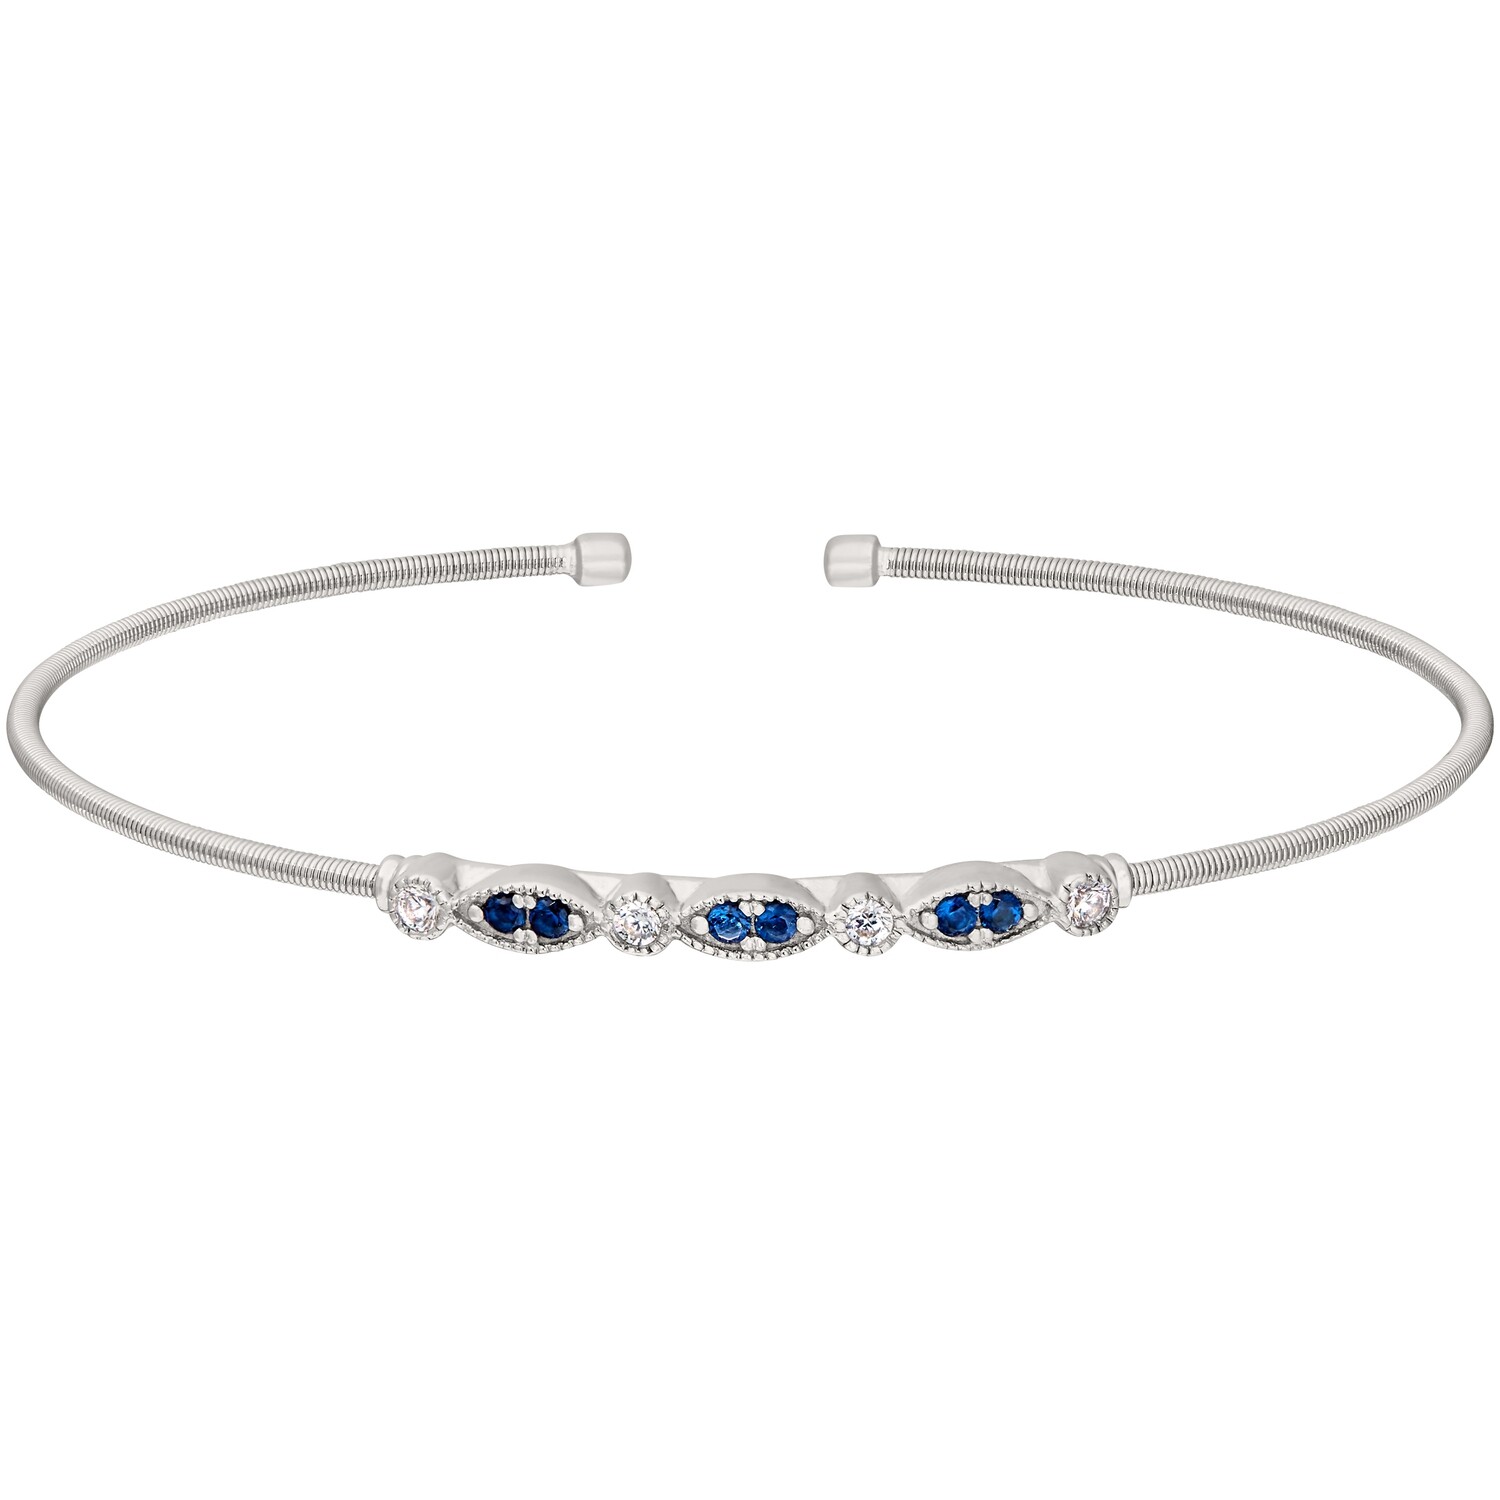 Silver Simulated Sapphire and Simulated Diamond Vintage Cuff Bracelet